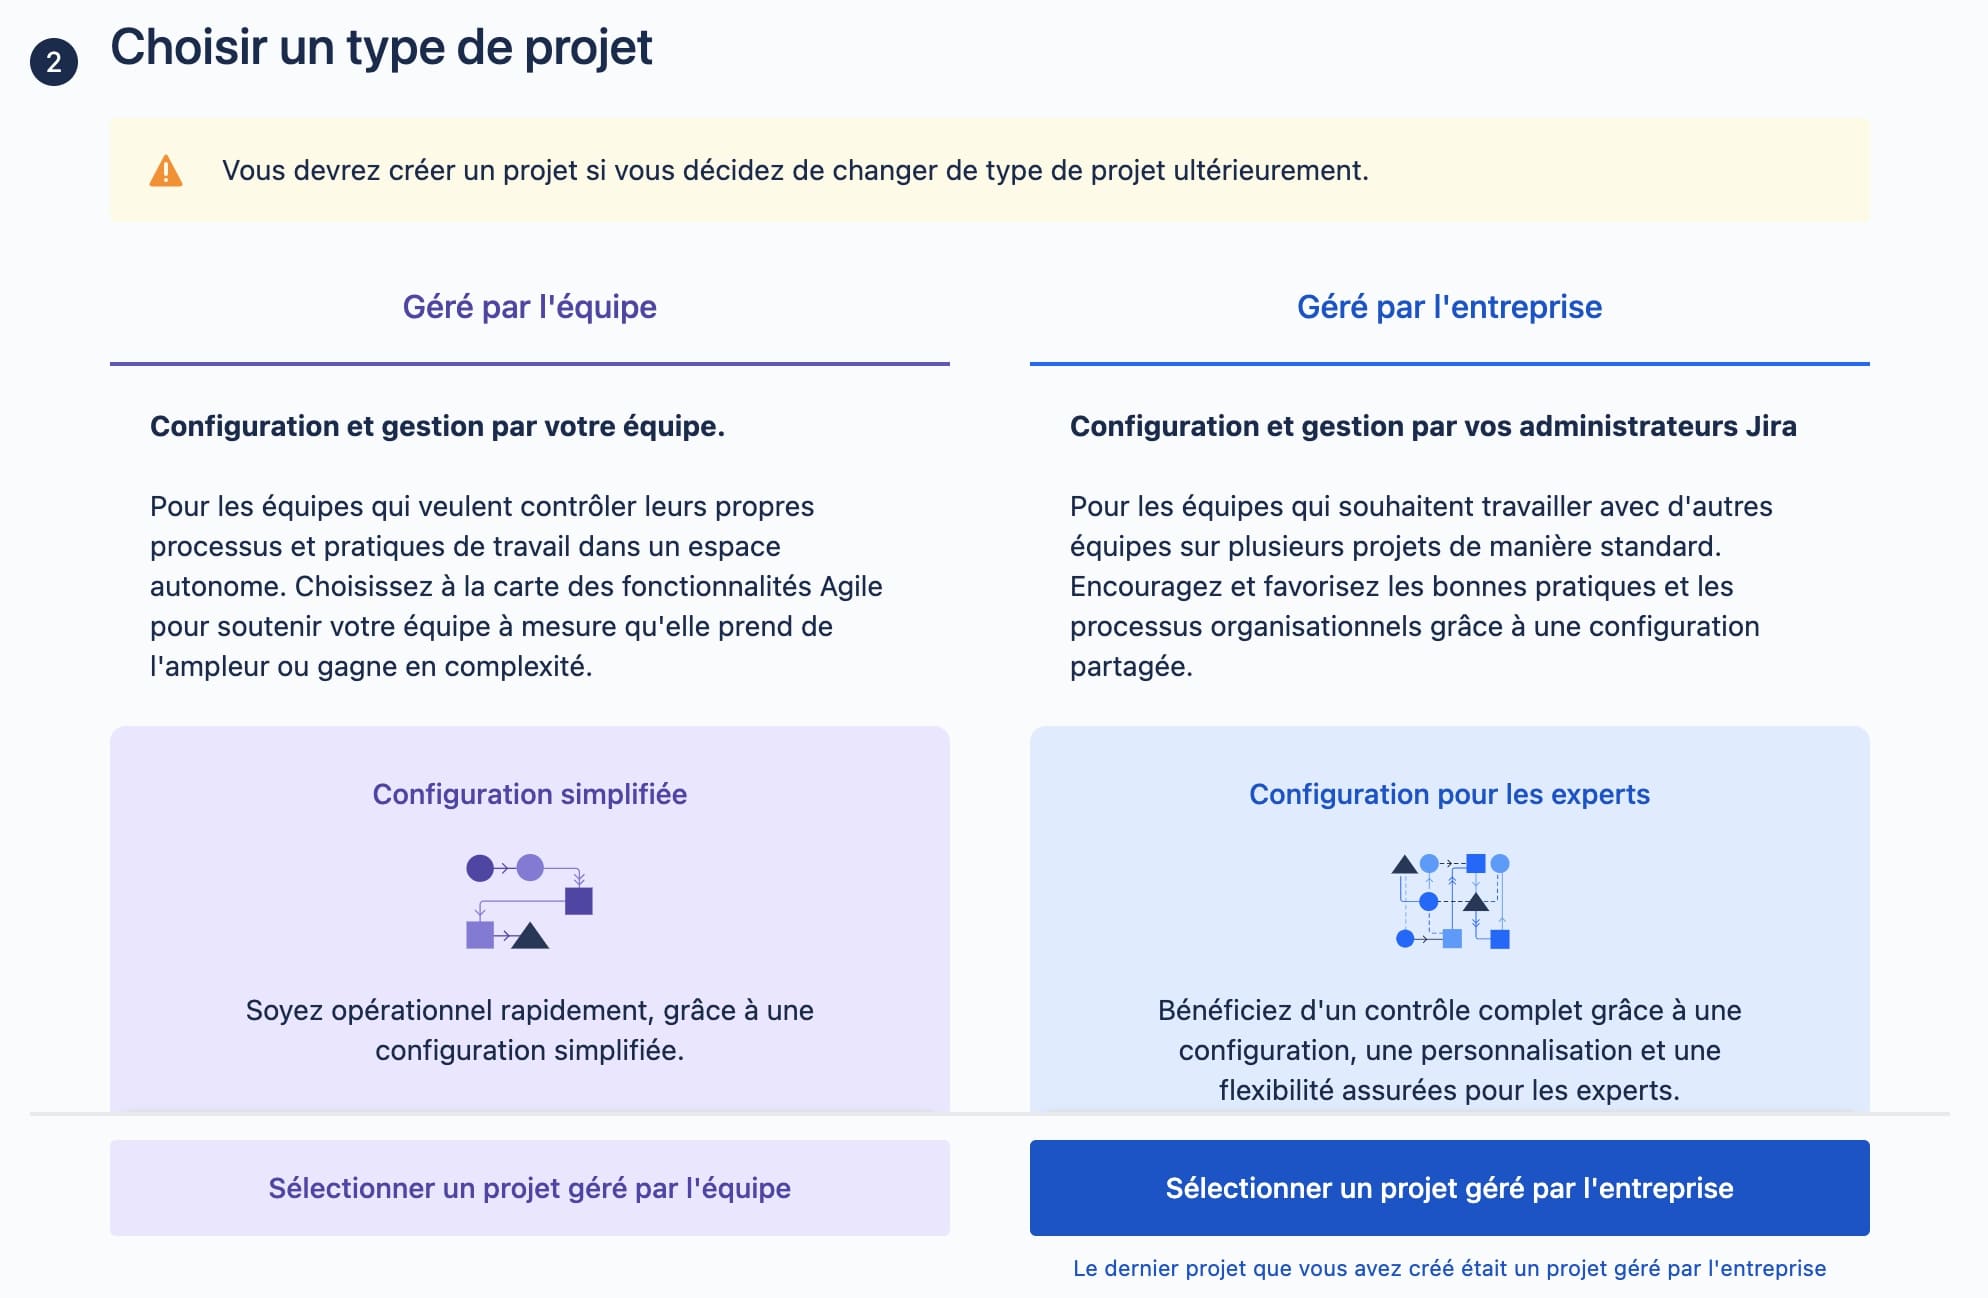 compagny managed team managed jira cloud